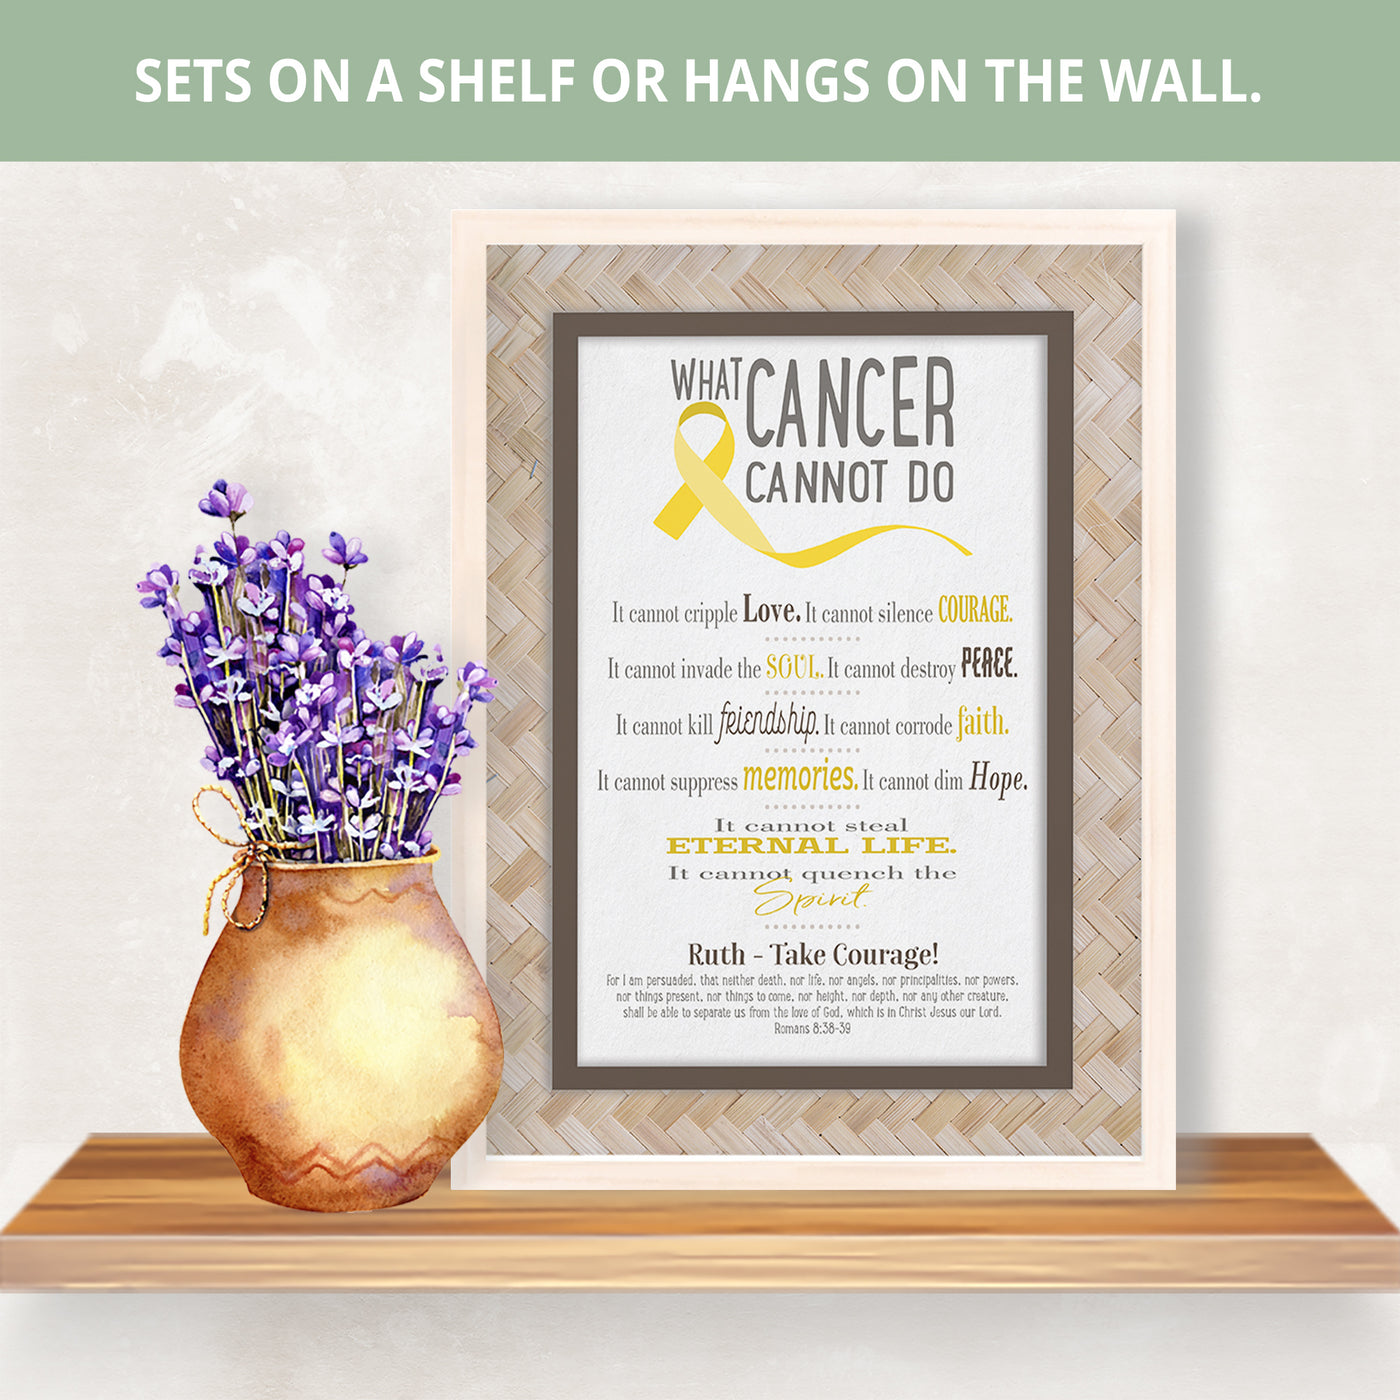 What Cancer Cannot Do | Personalized Cancer Encouragement Print, Wall Decor - Yellow Ribbon